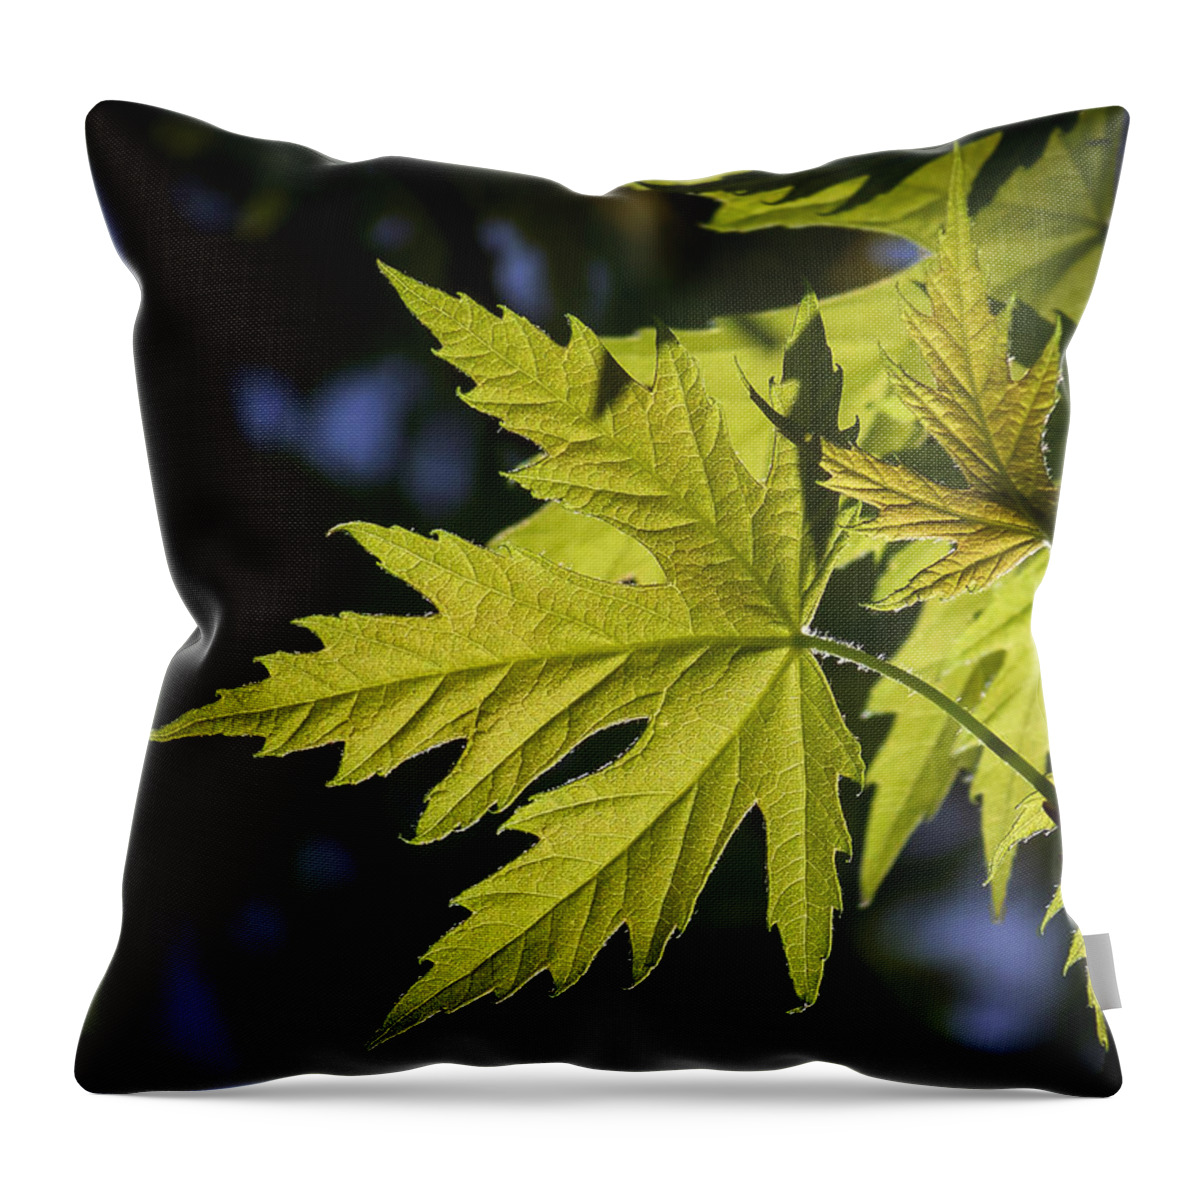 Colorful Throw Pillow featuring the photograph Silver Maple by Ernest Echols